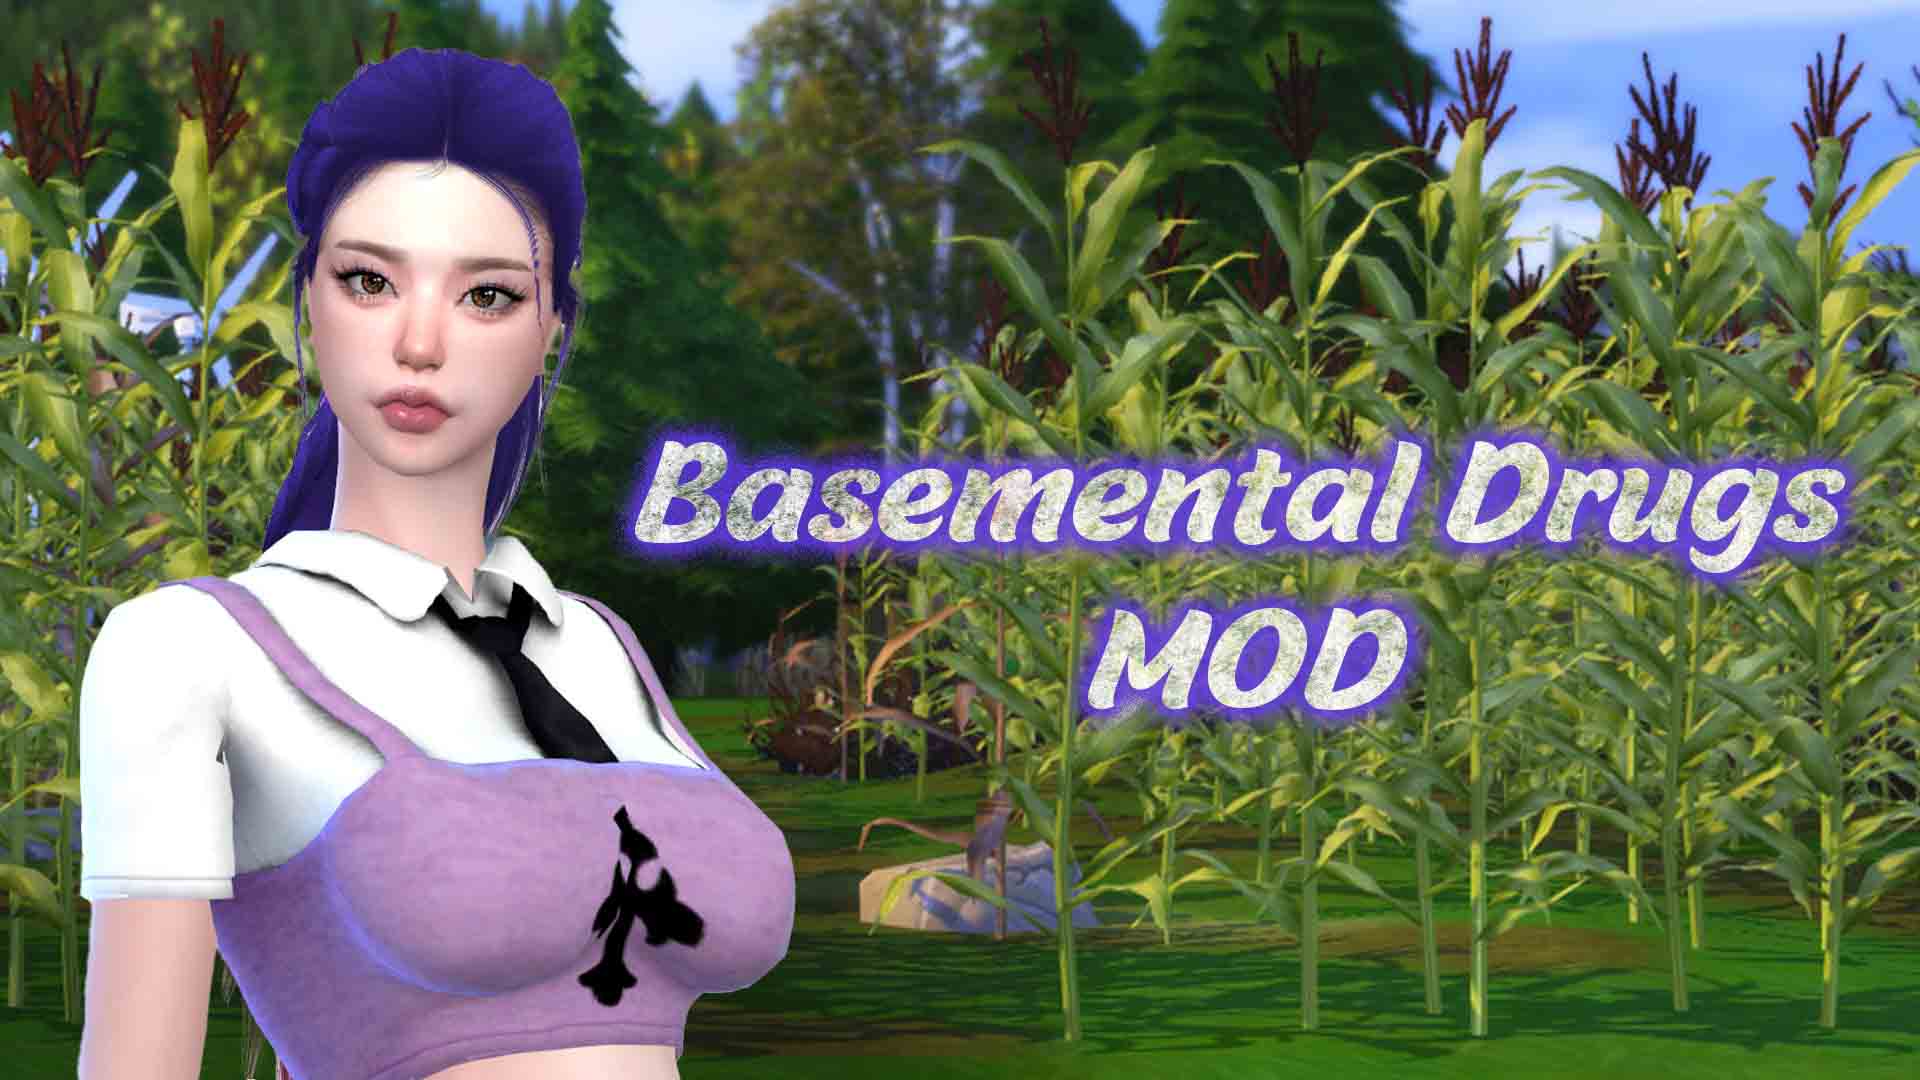 Wicked мод симс 4 русификатор. Basemental drugs SIMS 4. Basemental drugs. SIMS 4 Basemental drugs Queen. Basemental drugs Dark web.